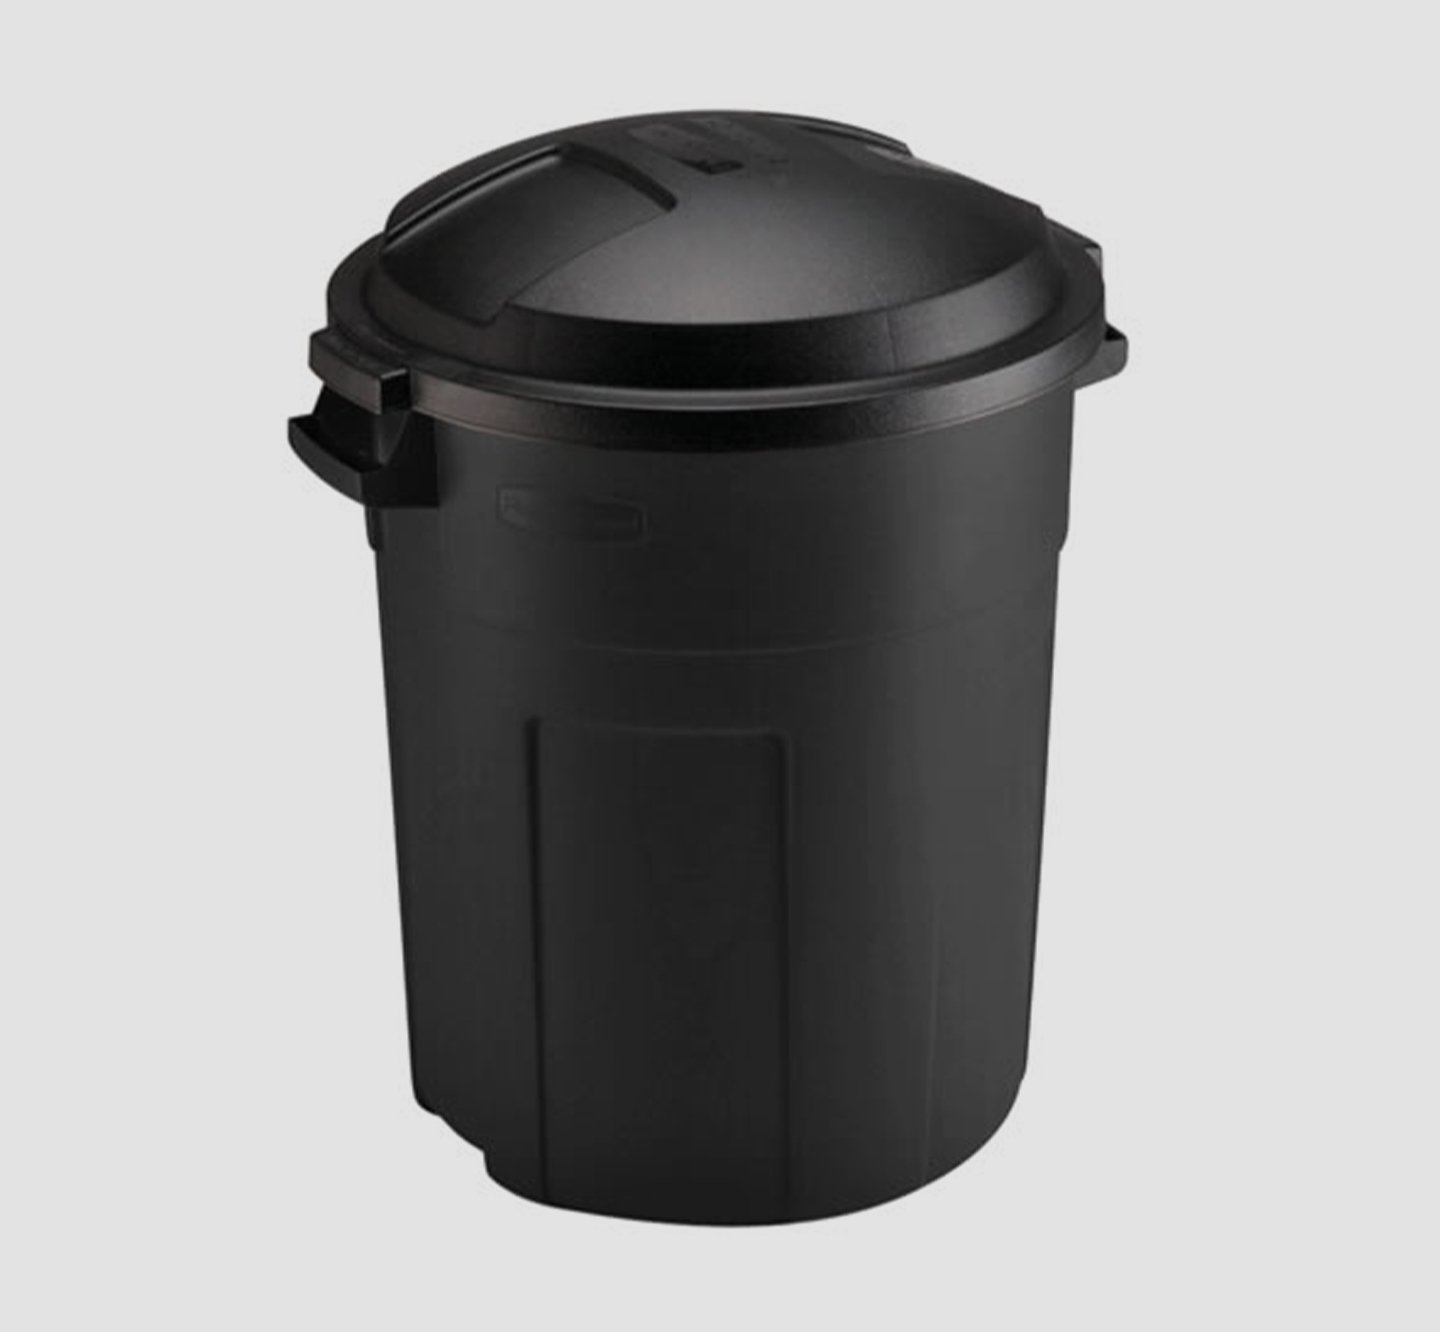 Rubbermaid Black 32 Gallon Outdoor Garbage Can with Wheels & Lid - Ace  Hardware - Ace Hardware